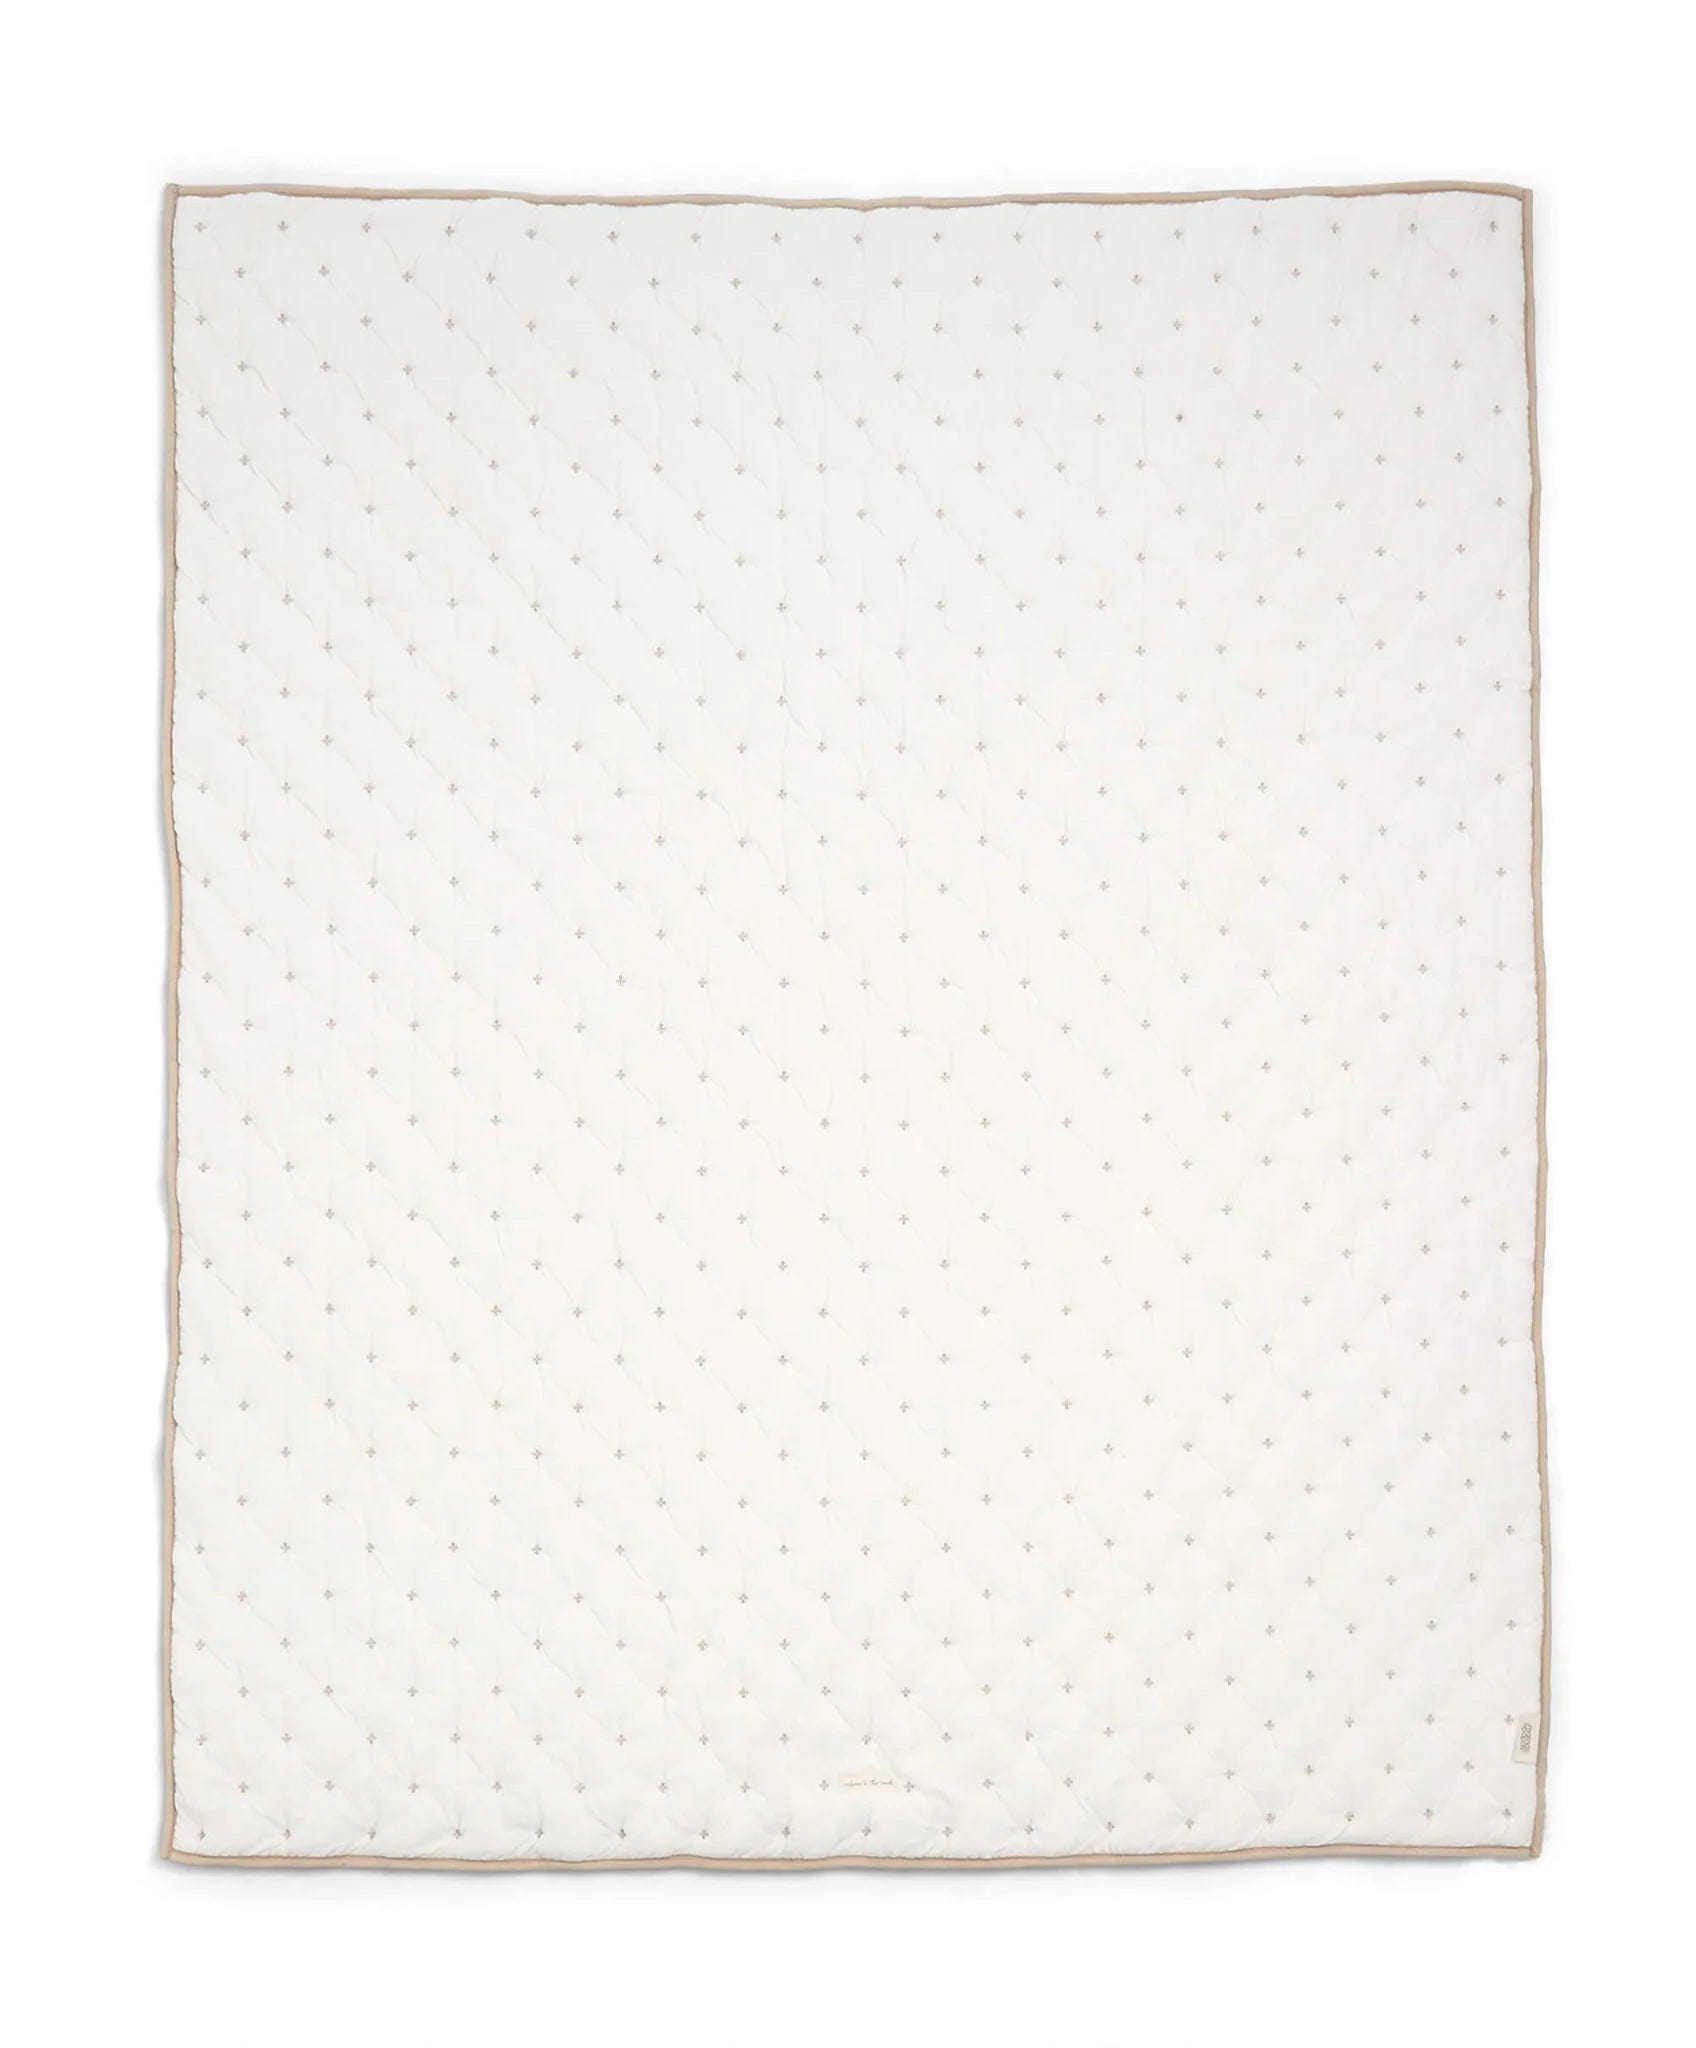 Mamas & Papas Welcome to the World Cotbed Quilt in Seedling Cot & Cot Bed Quilts 704103400